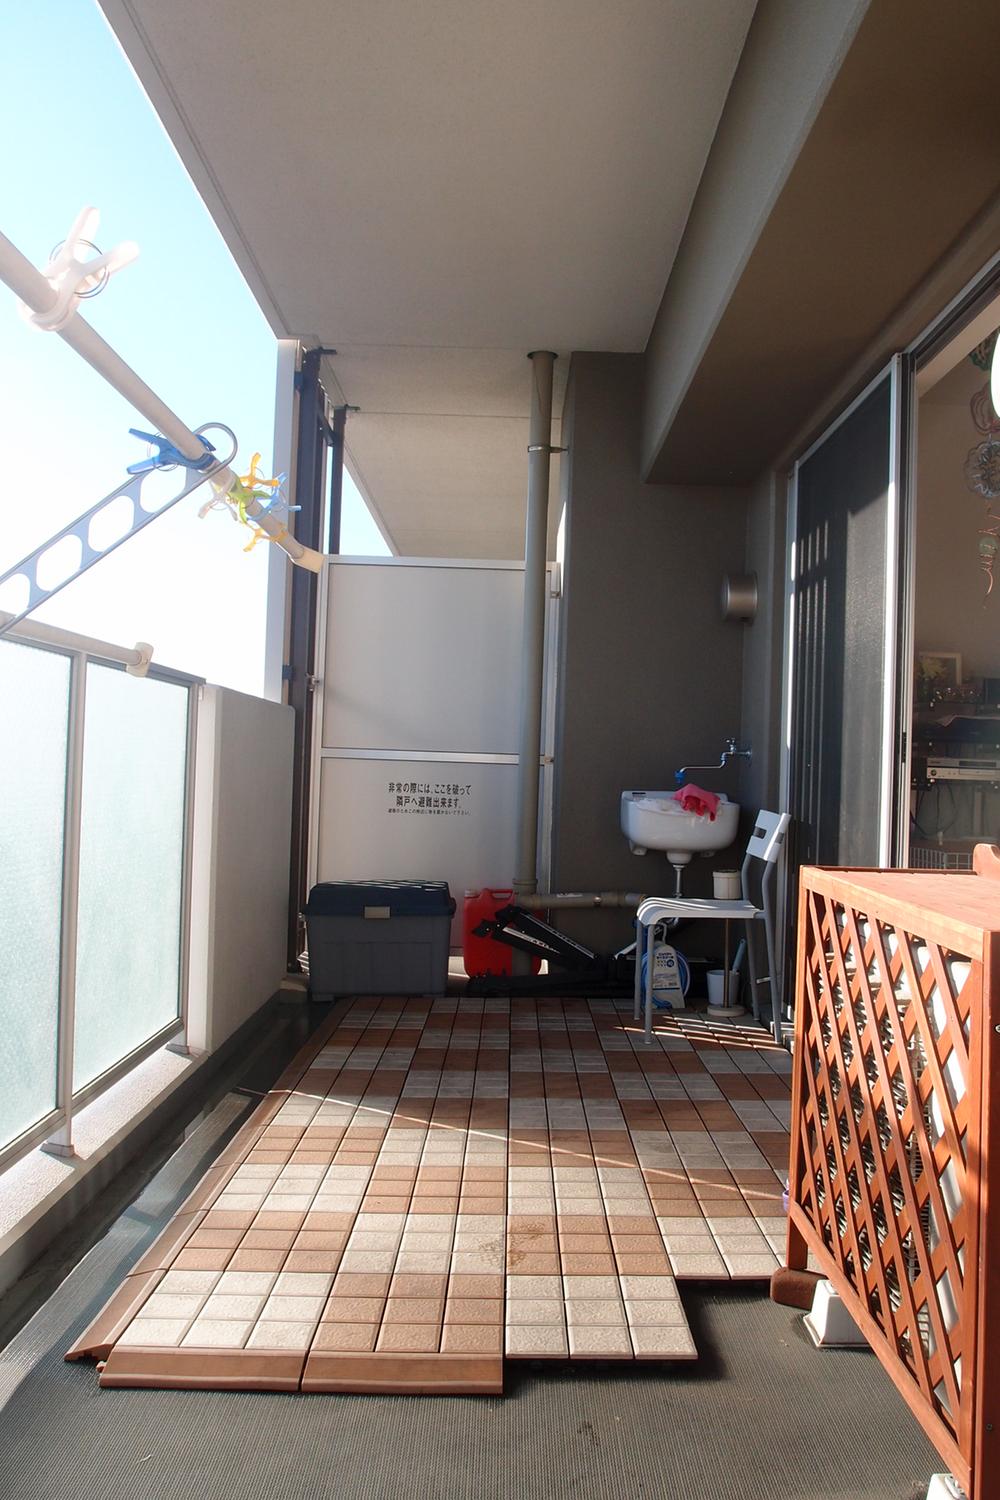 Balcony. Balcony (12 May 2013) Shooting  ※ Furniture and the like in the photo are not included in the sale